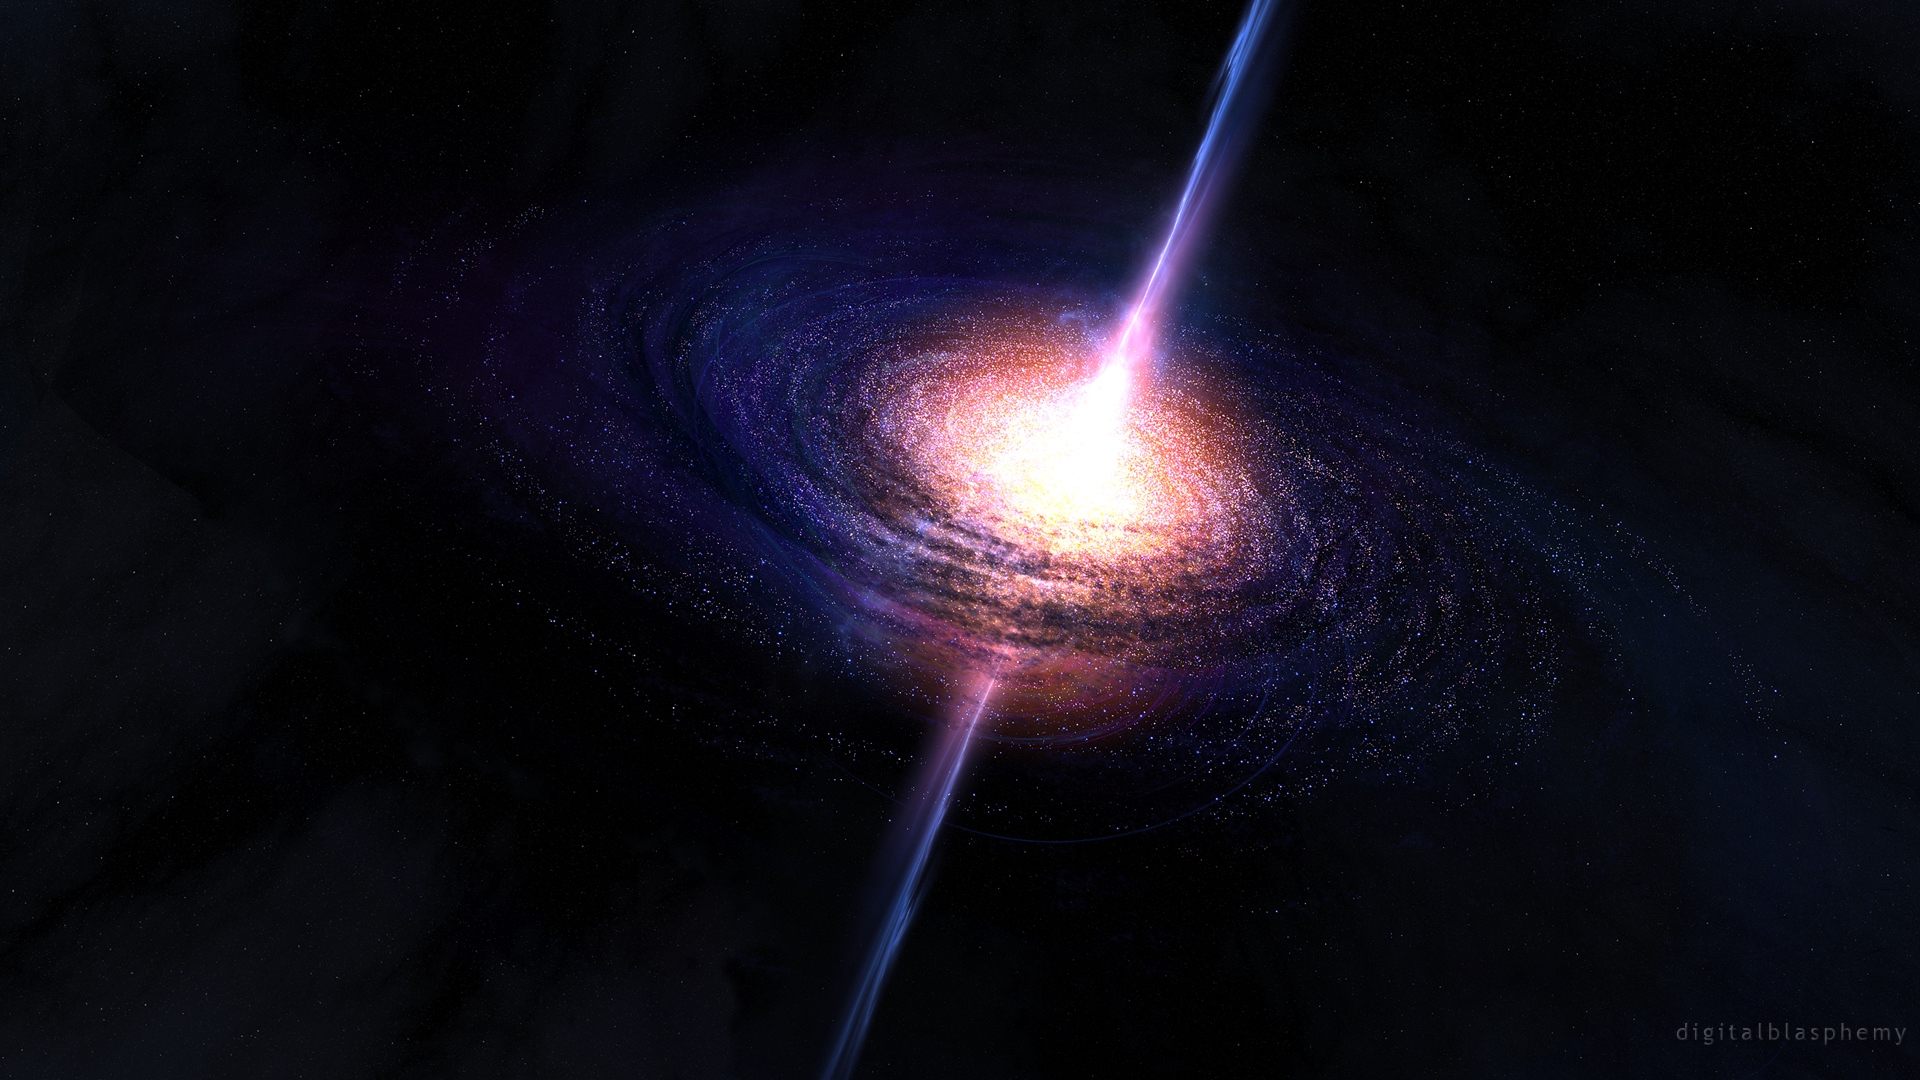 Black Hole And Accretion Disk The Above Picture Is Of A